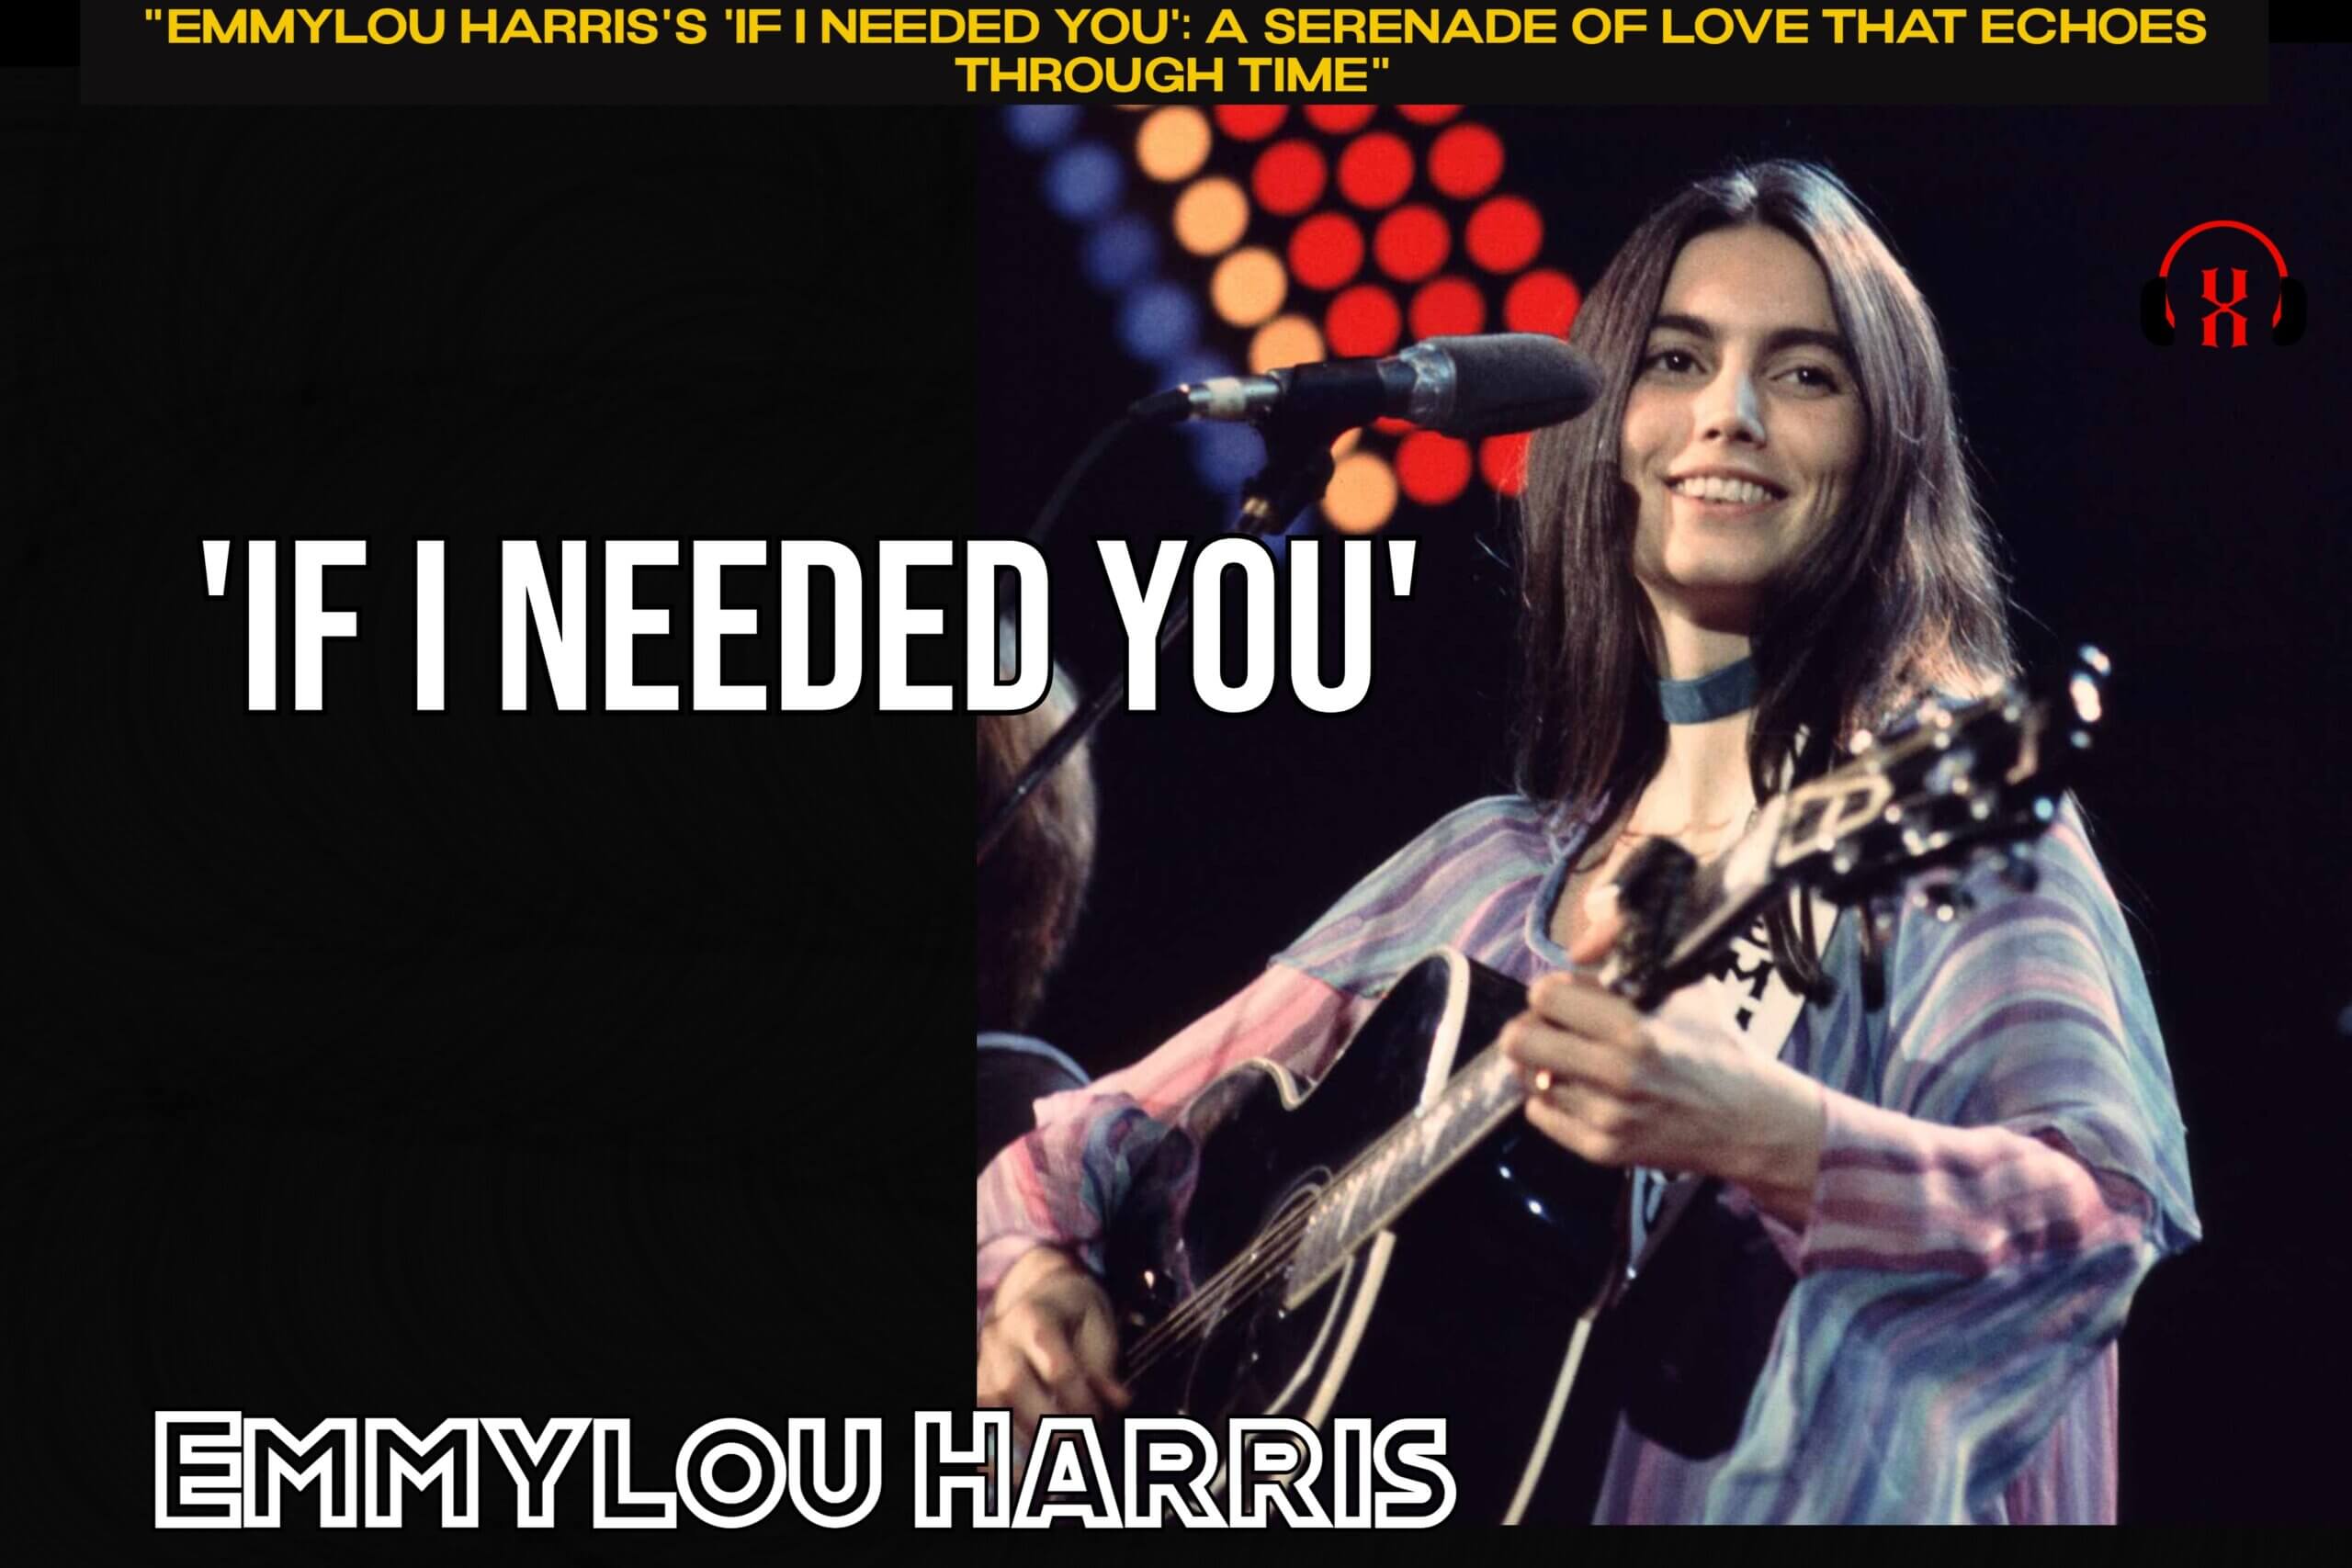 “Emmylou Harris’s ‘If I Needed You’: A Serenade of Love That Echoes Through Time”